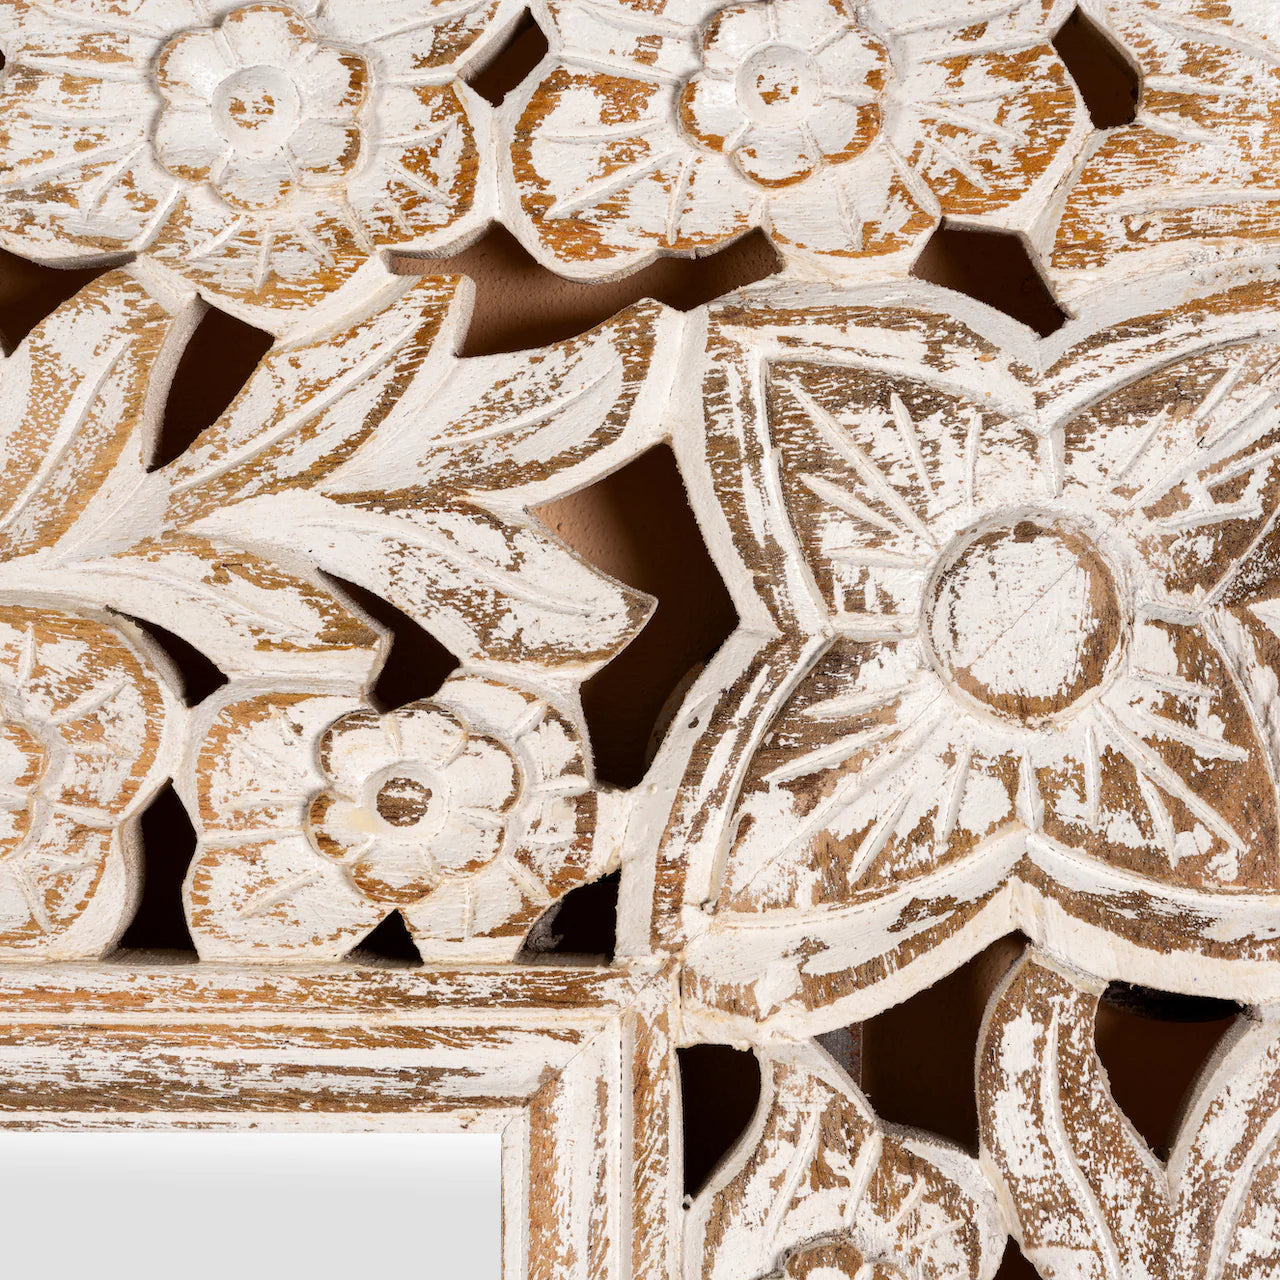 Artisanal Hand-Carved Floral Wall Mirror